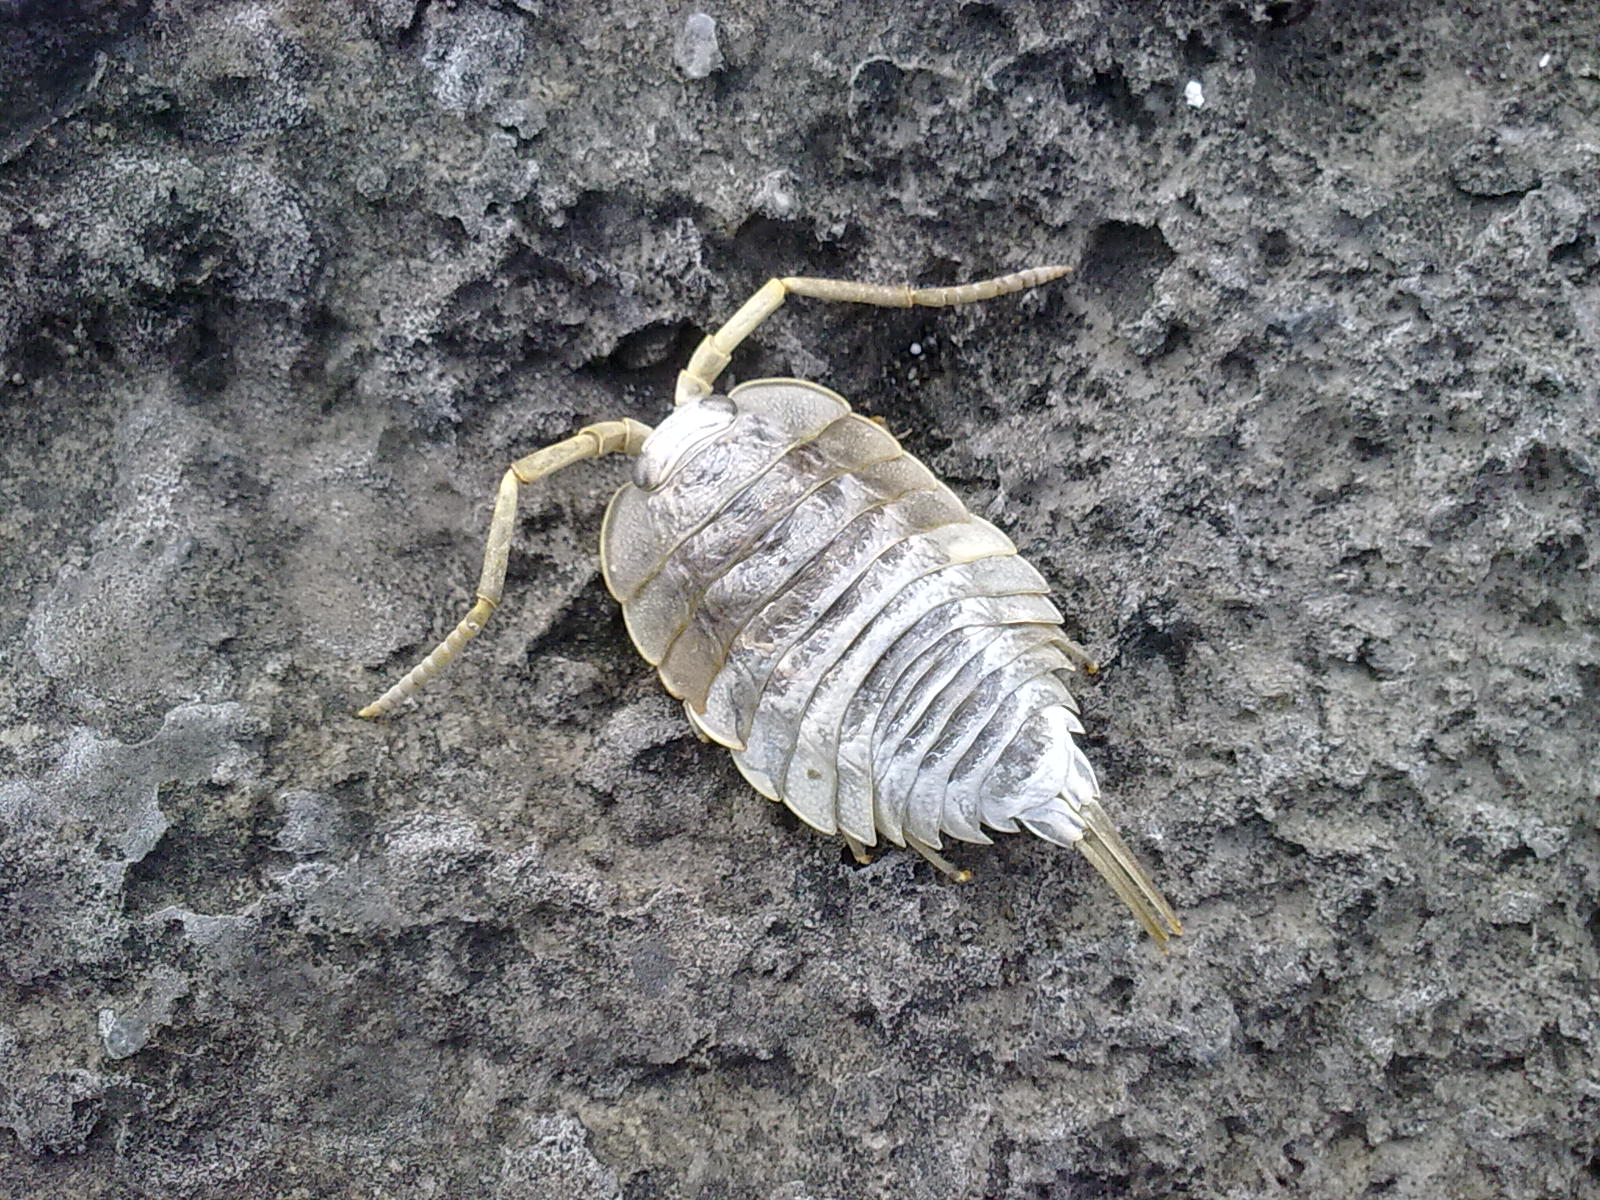 File:Unknown animal in Inis Meáin.jpg - Wikimedia Commons